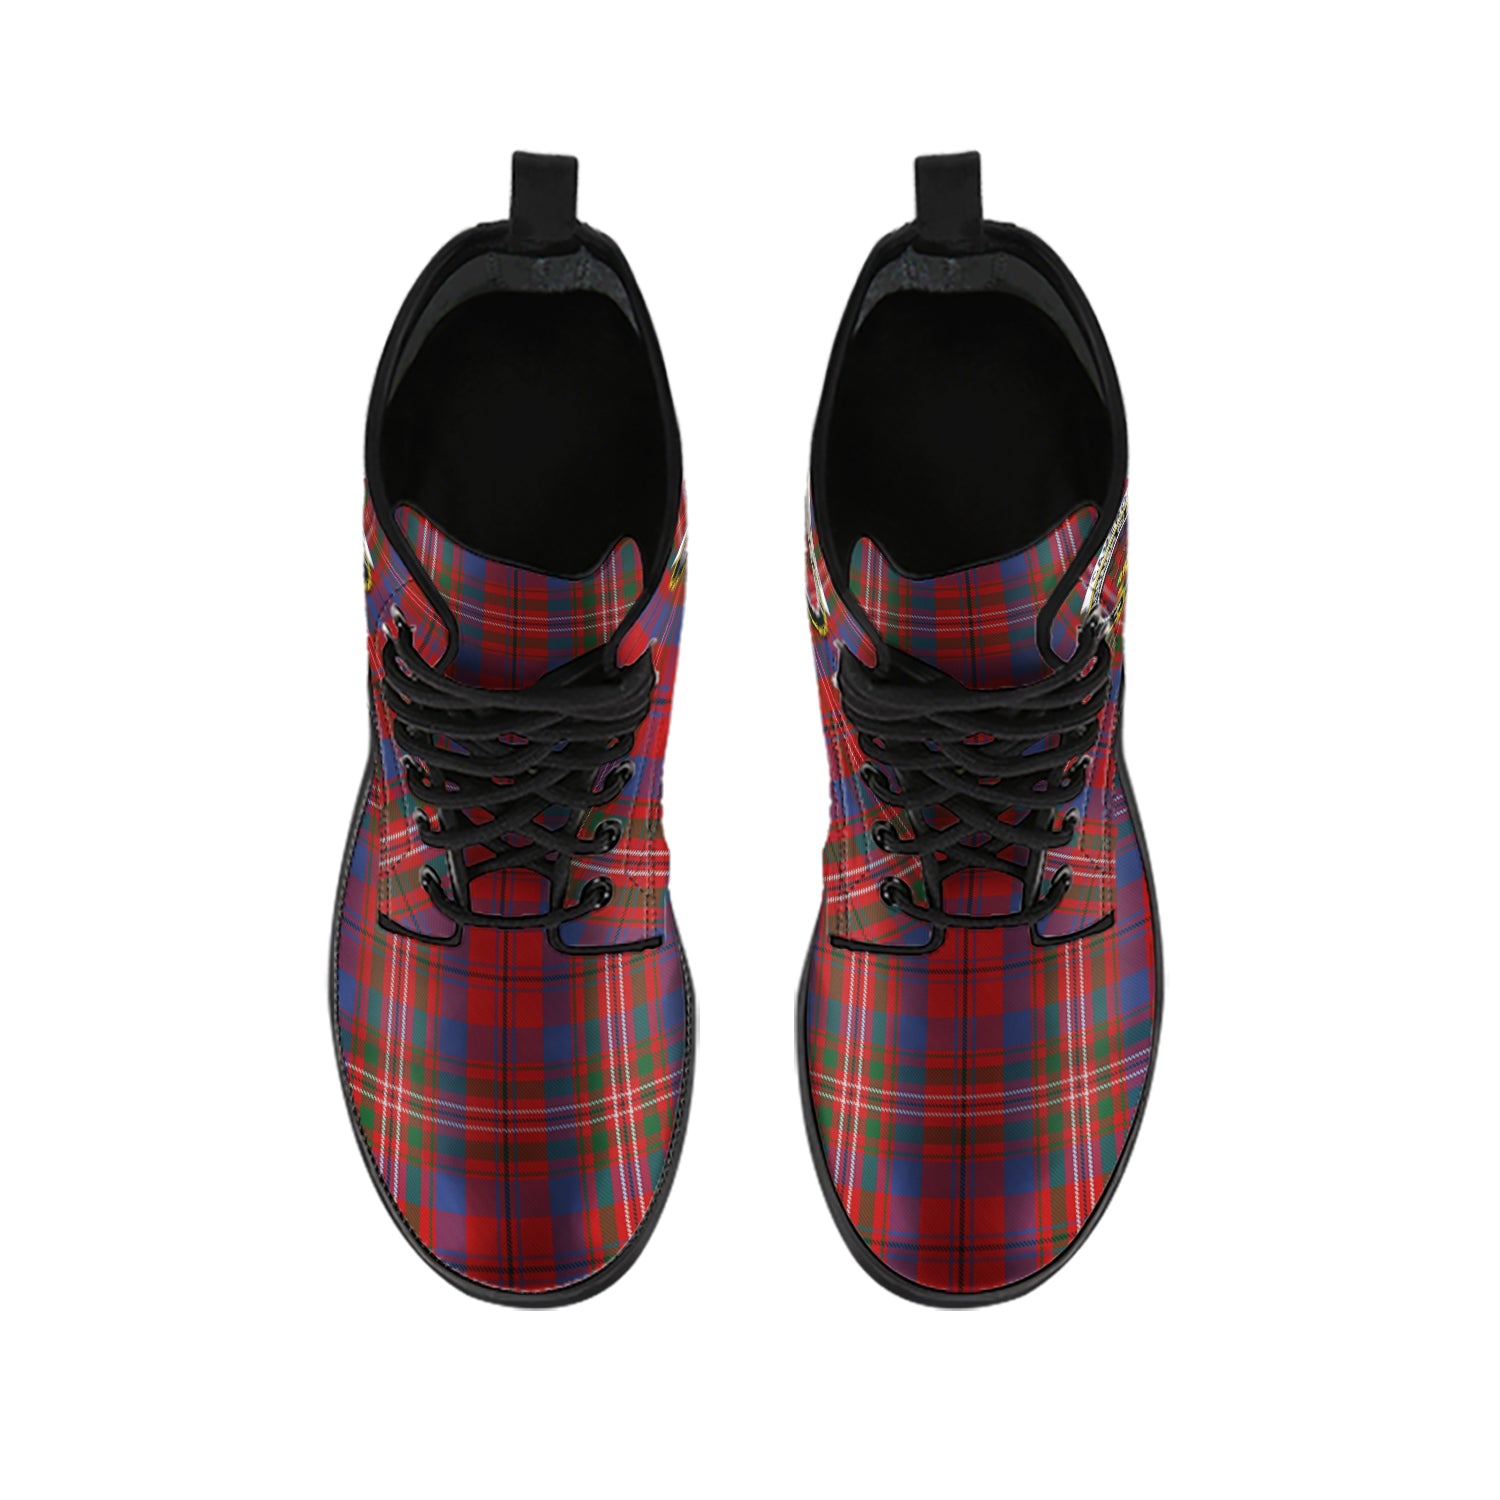 cameron-of-locheil-tartan-leather-boots-with-family-crest